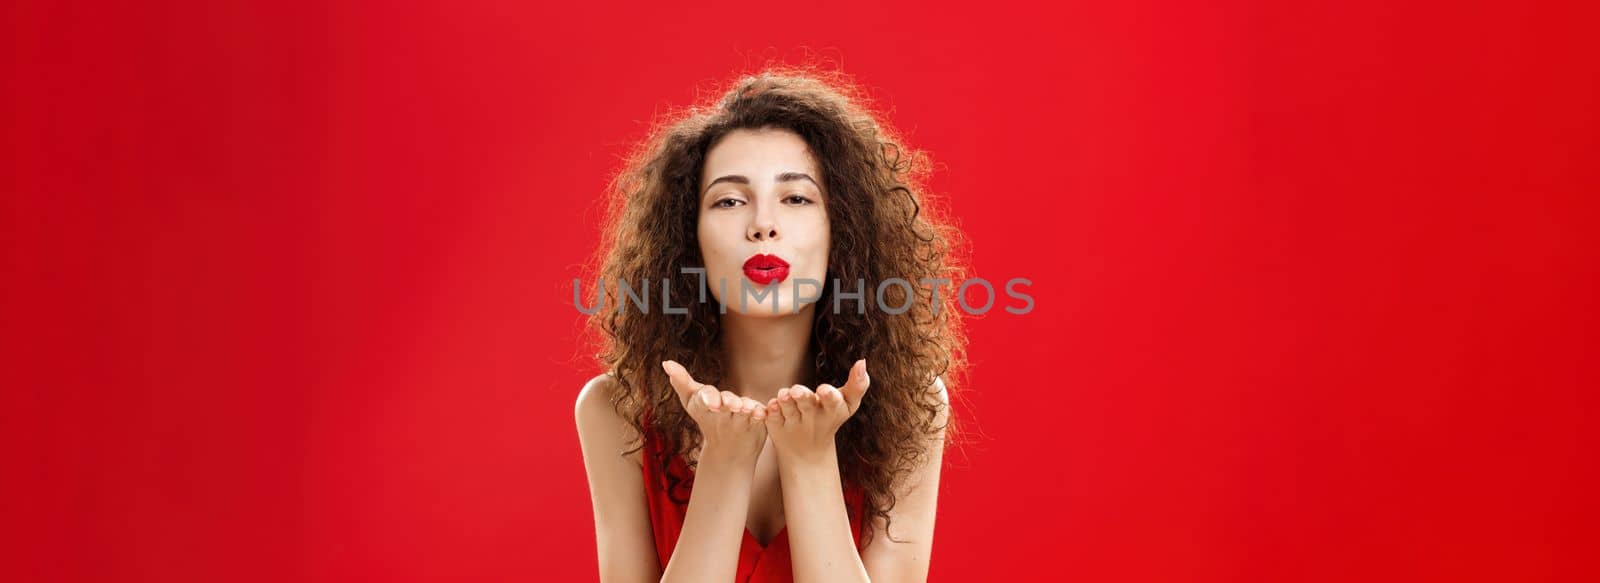 Woman rewards boyfriend with passionate wind kiss after romantic date. Portrait of sensual hot adult female in red elegant dress with curly hairstyle bending towards camera sending mwah flirty. Romance concept